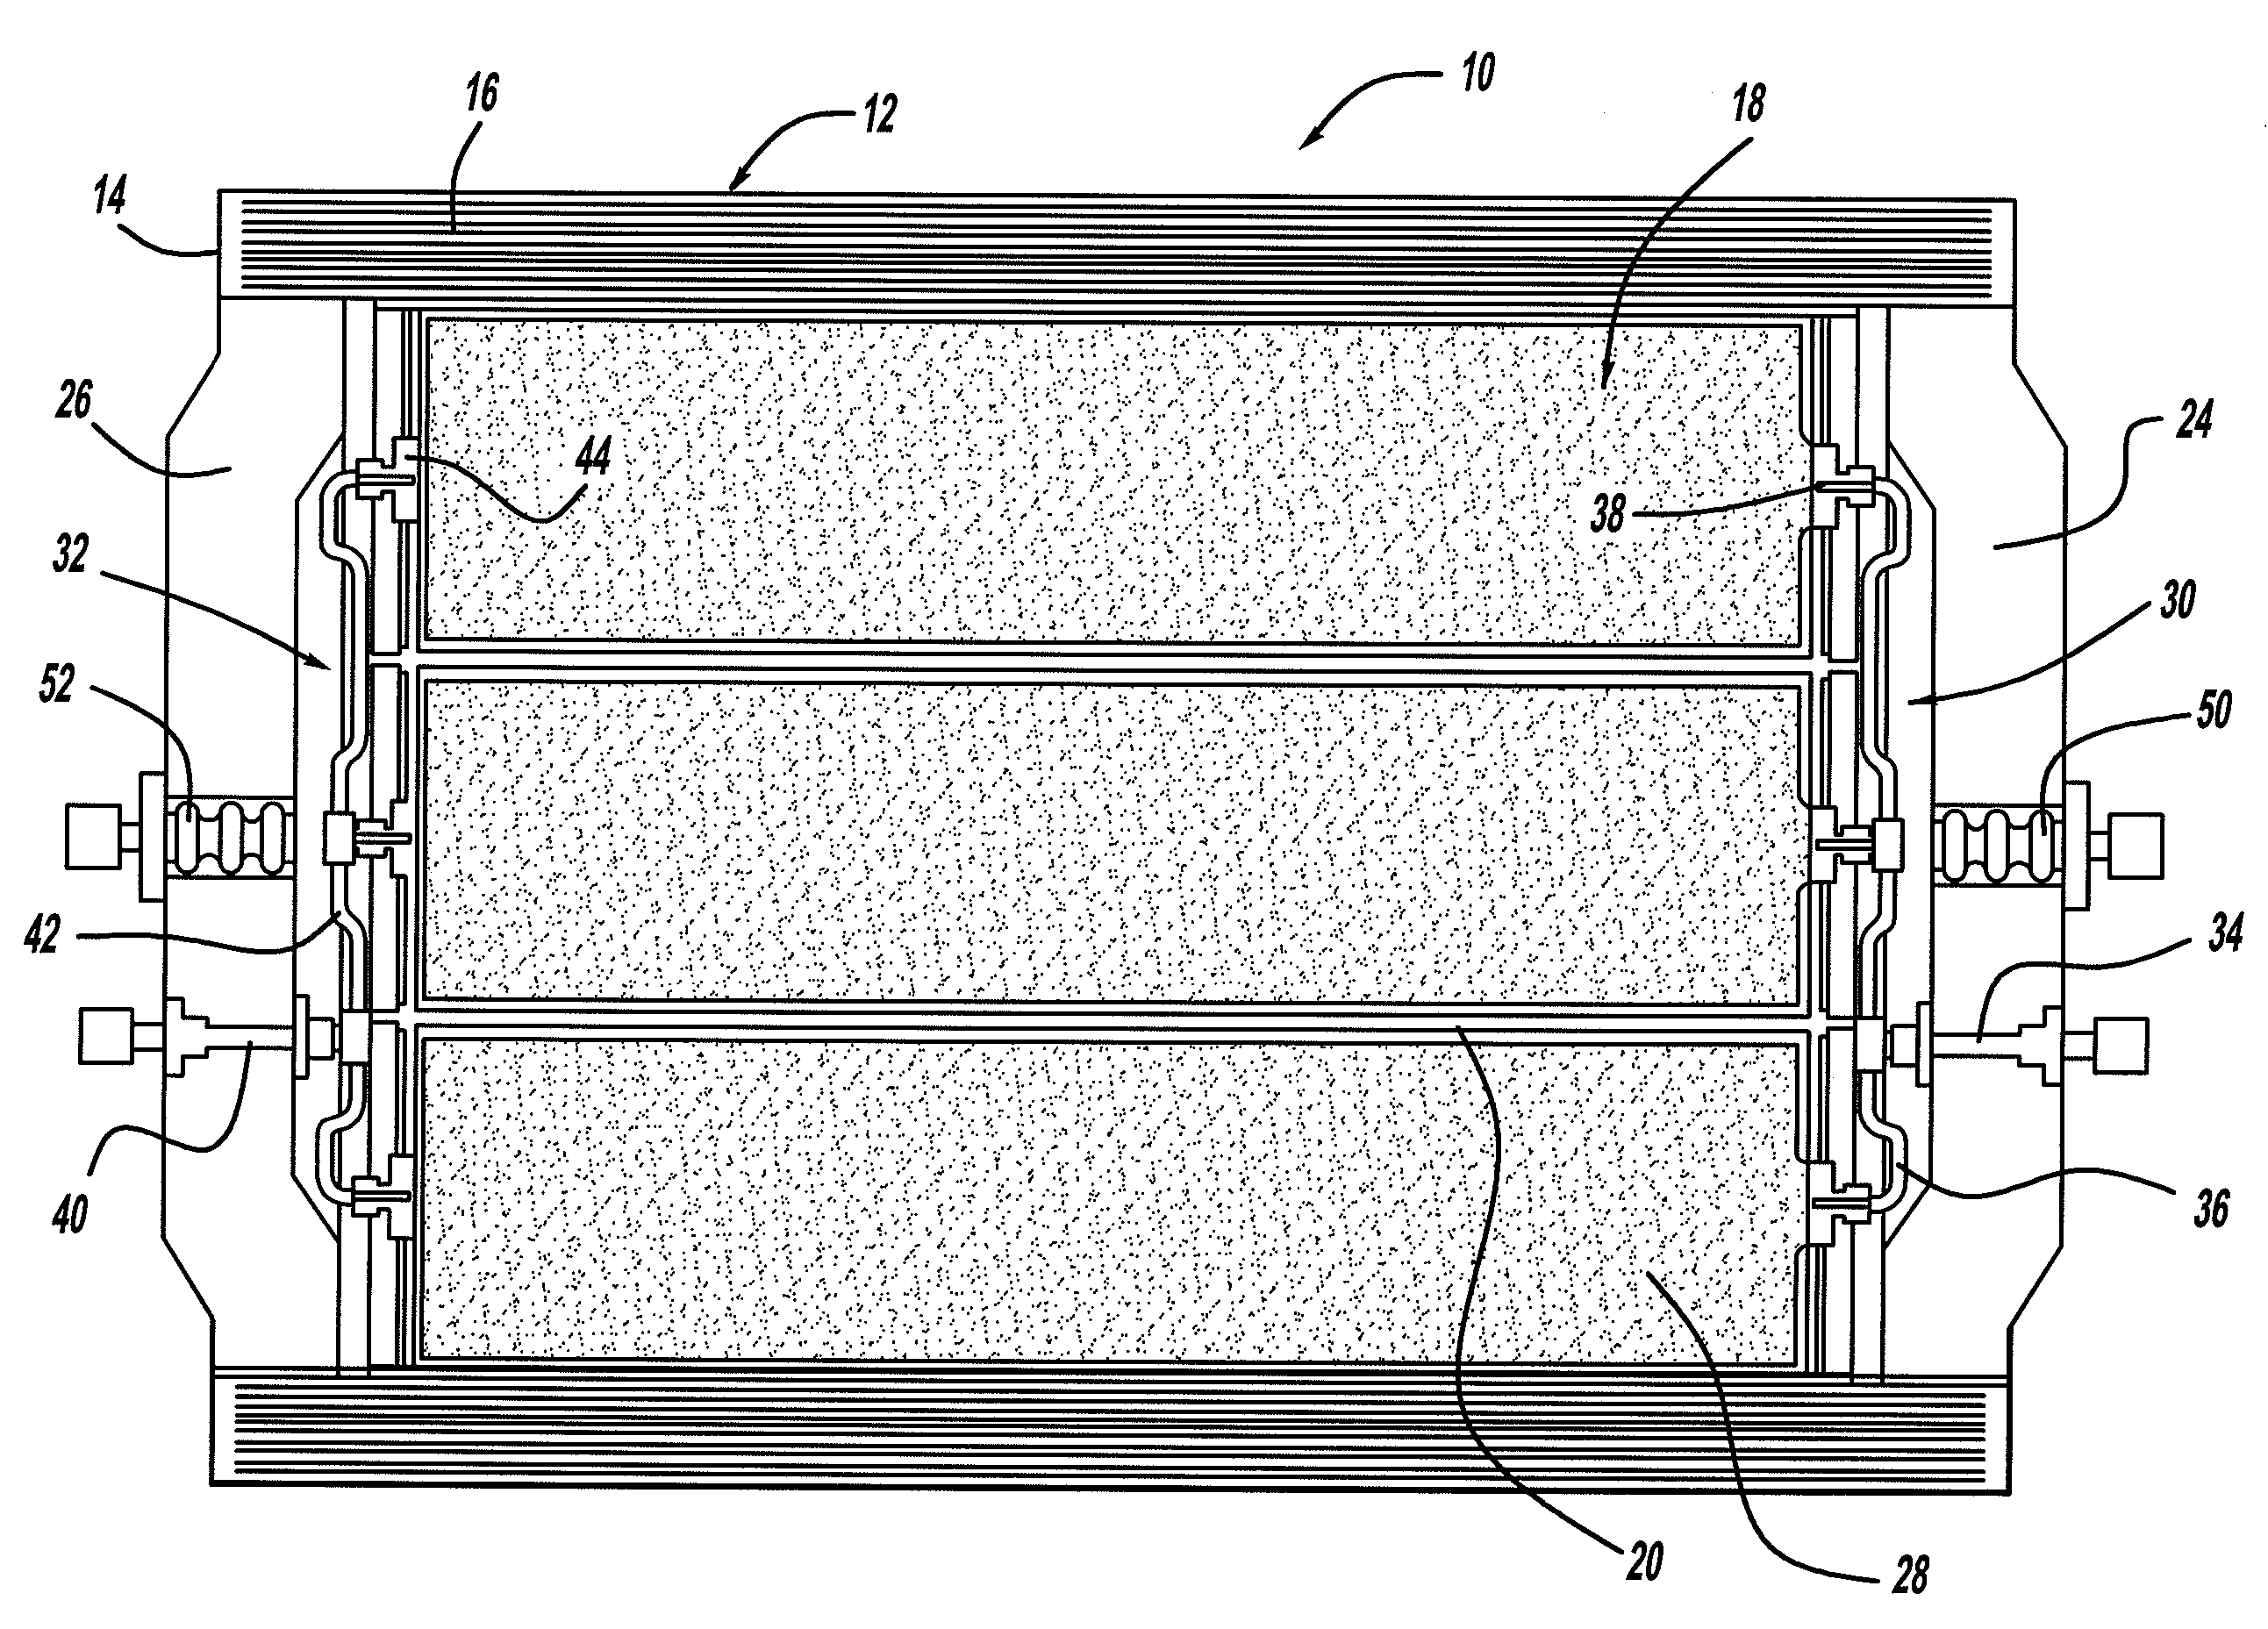 Hydrogen Storage Tank System Based on Gas Adsorption on High-Surface Materials Comprising an Integrated Heat Exchanger